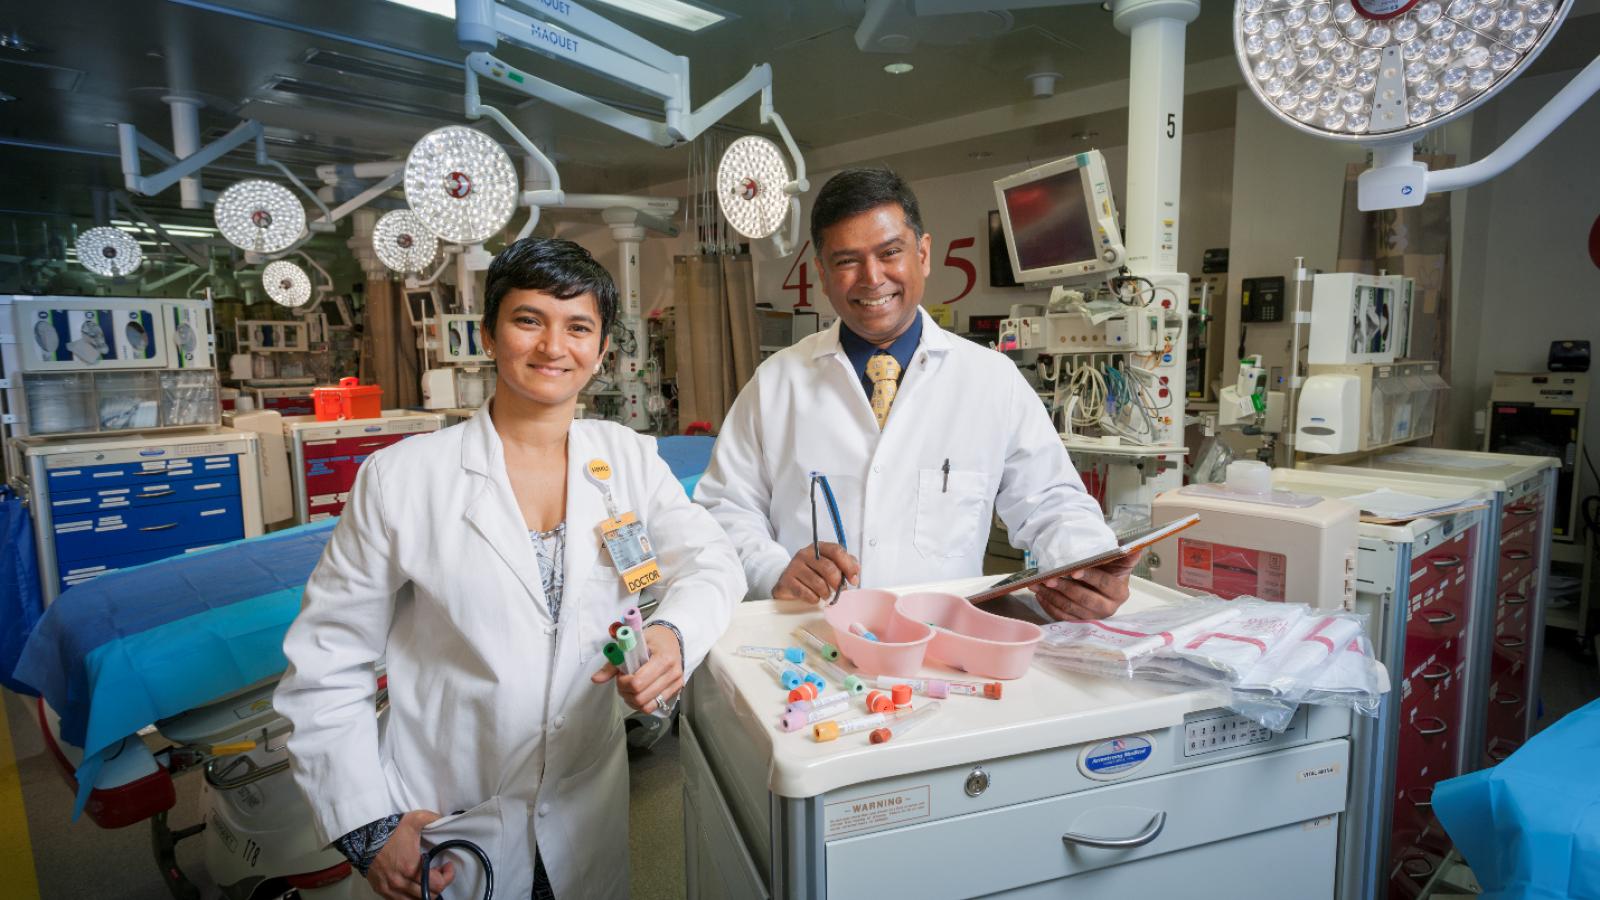 VCU Health trauma surgeon Sudha Jayaraman, M.D., and VCU School of Pharmacy assistant professor Dayanjan “Shanaka” Wijesinghe, Ph.D., collaborate on using mass spectrometry as a new method of analyzing what medications are in a patient’s blood. Photo: Karl Steinbrenner